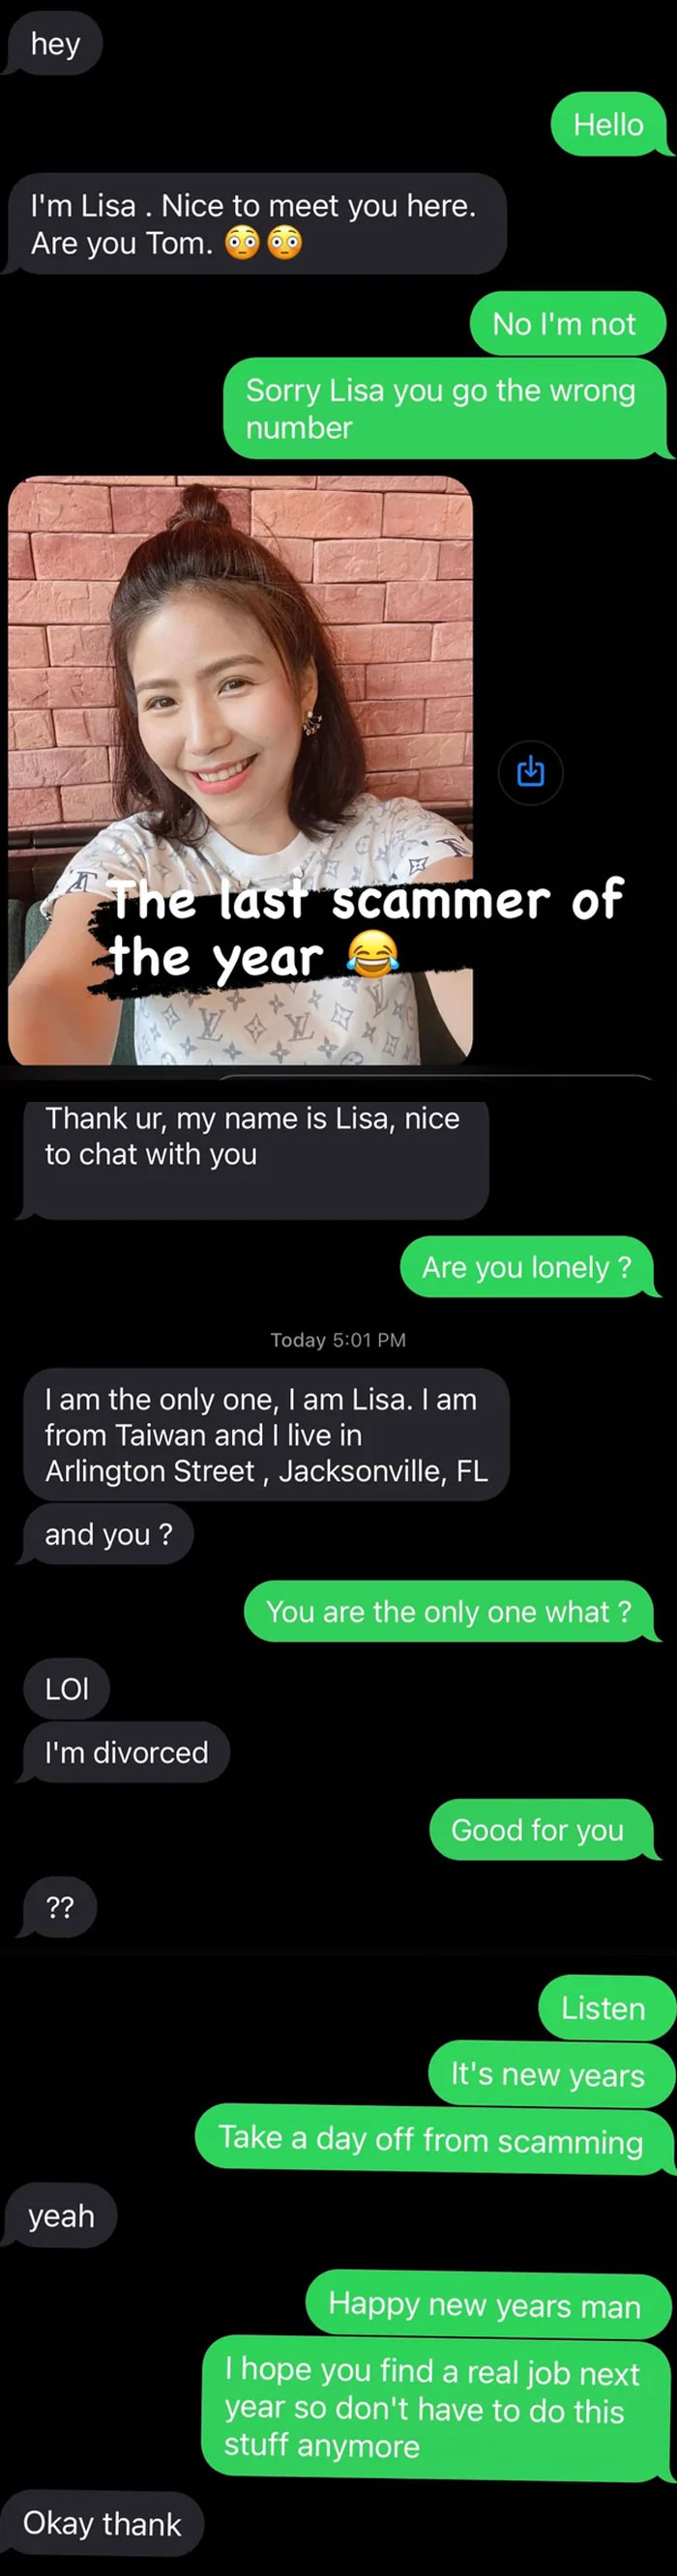 I Had This Interaction With A Scammer On New Years And I Was Told I Should Post It Here